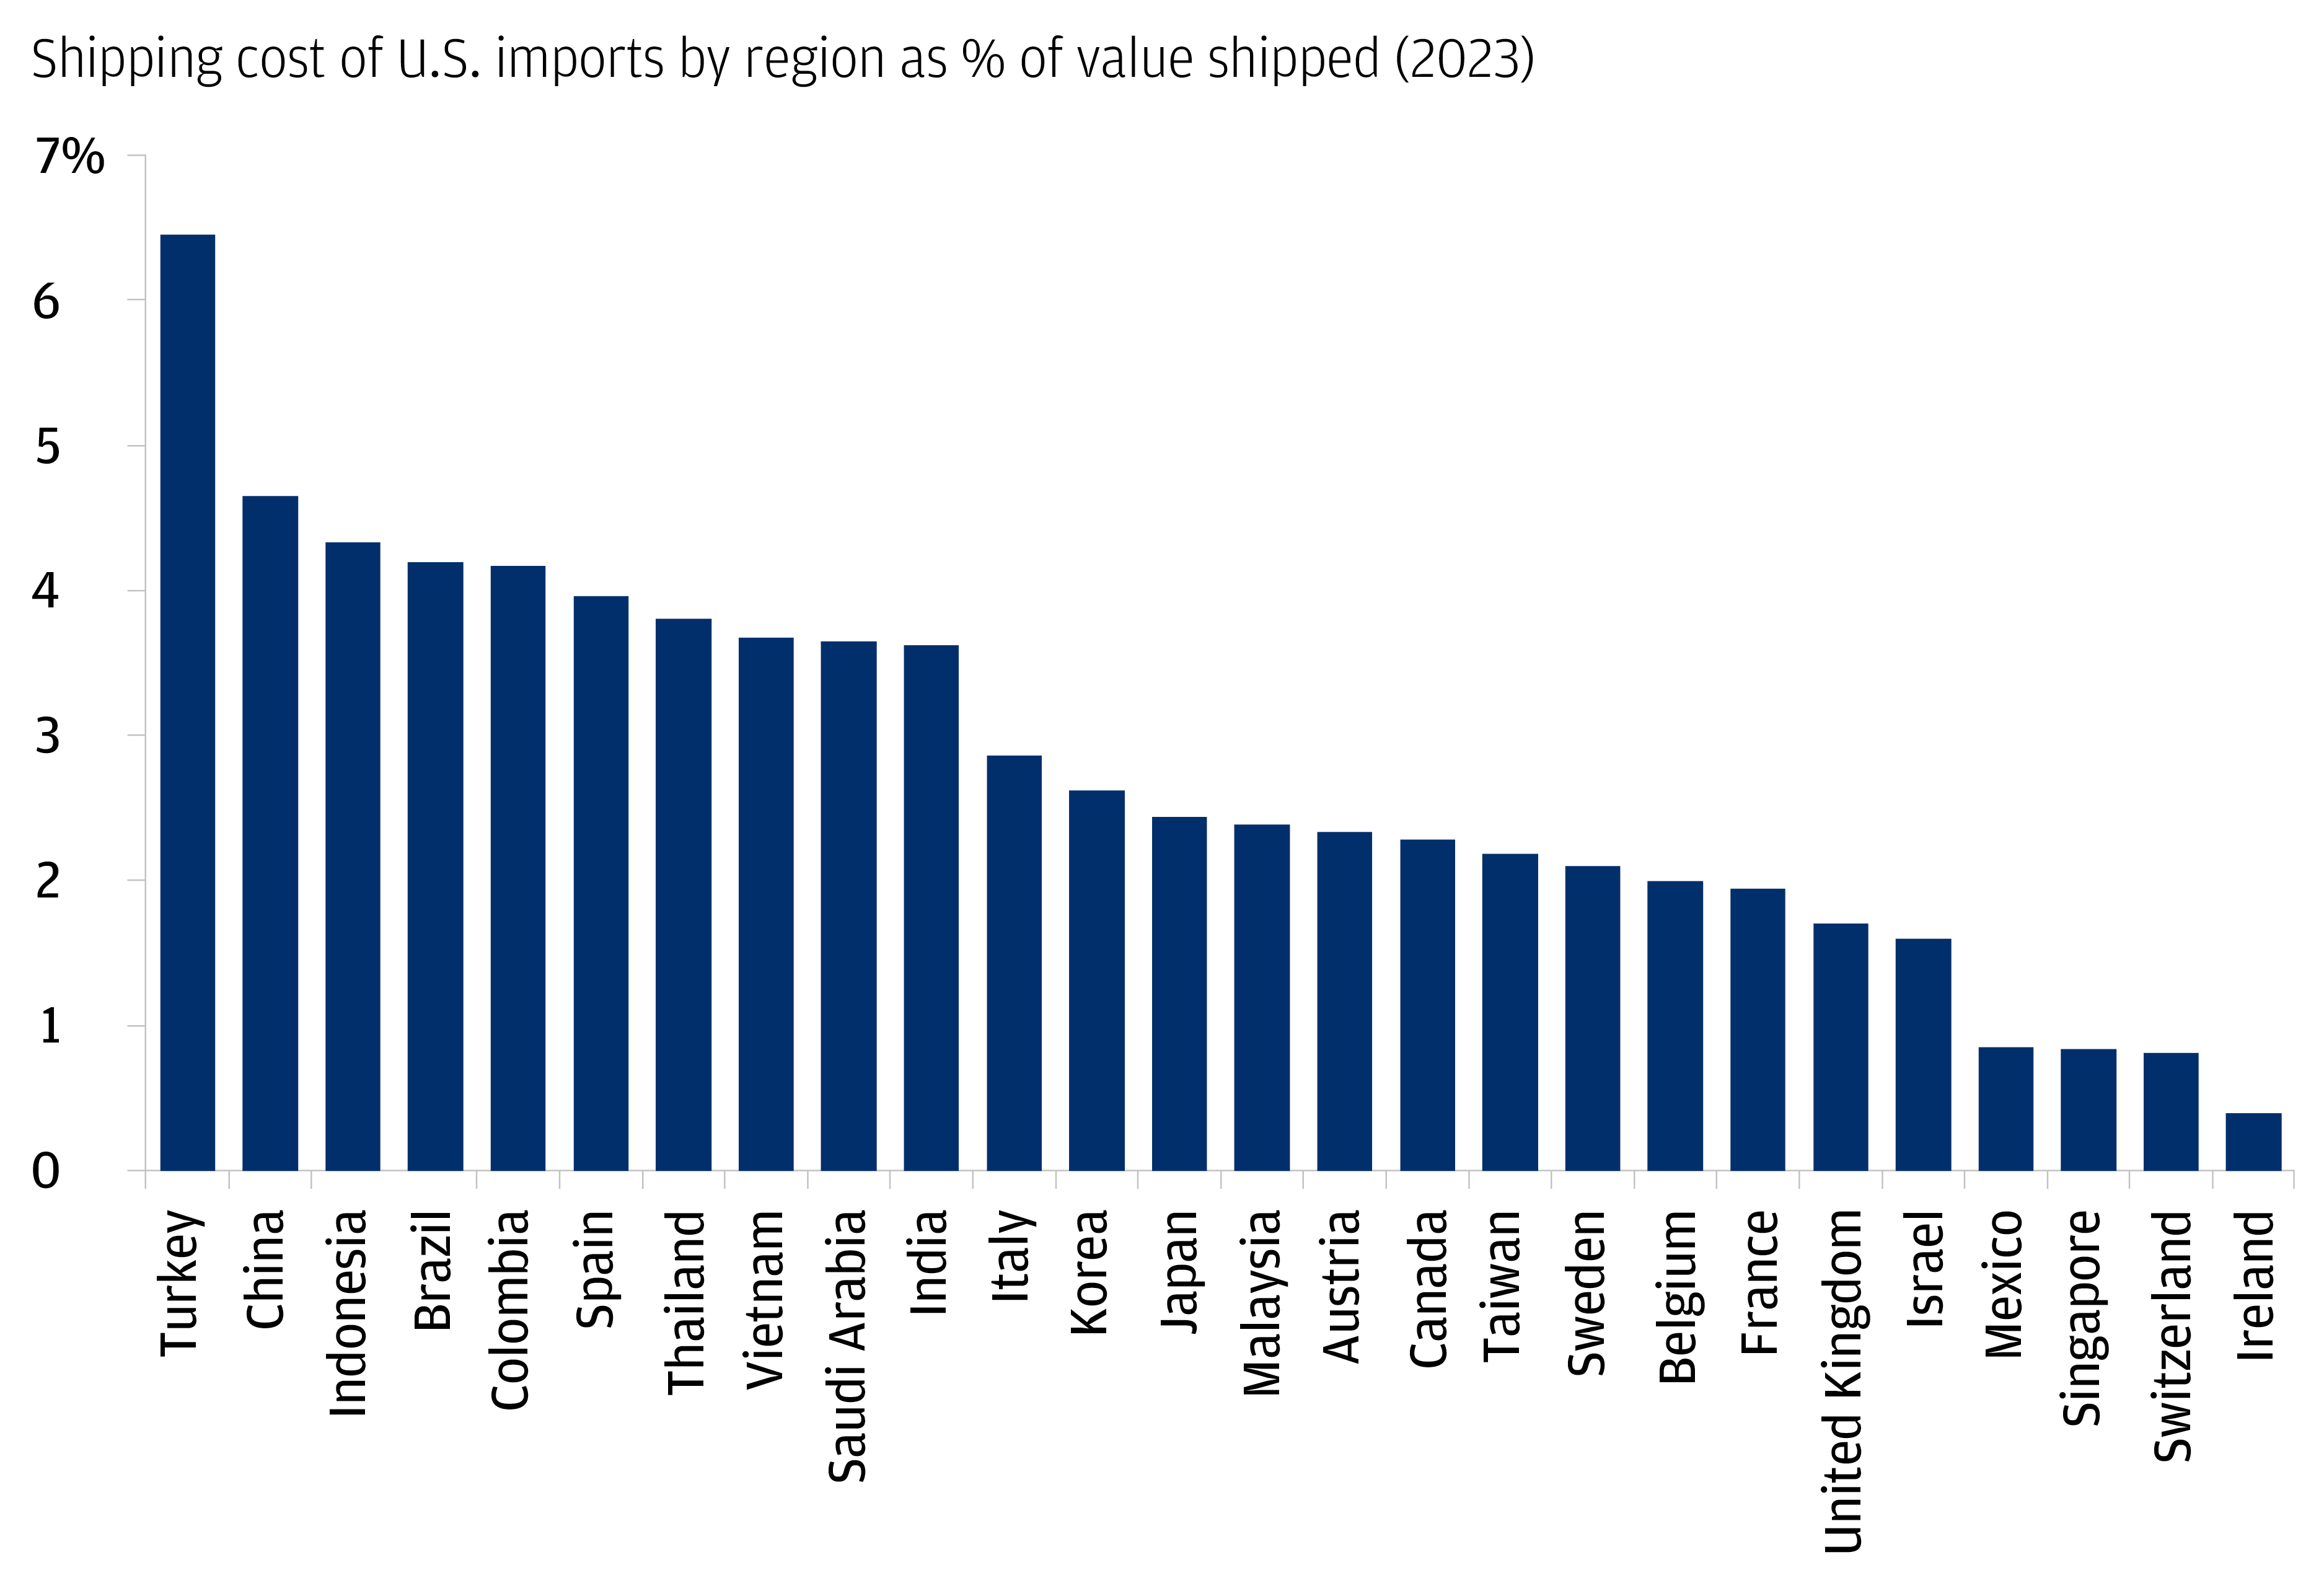 The chart describes the shipping costs of U.S. imports by region in 2023. It uses the shipping cost as % of value shipped. 